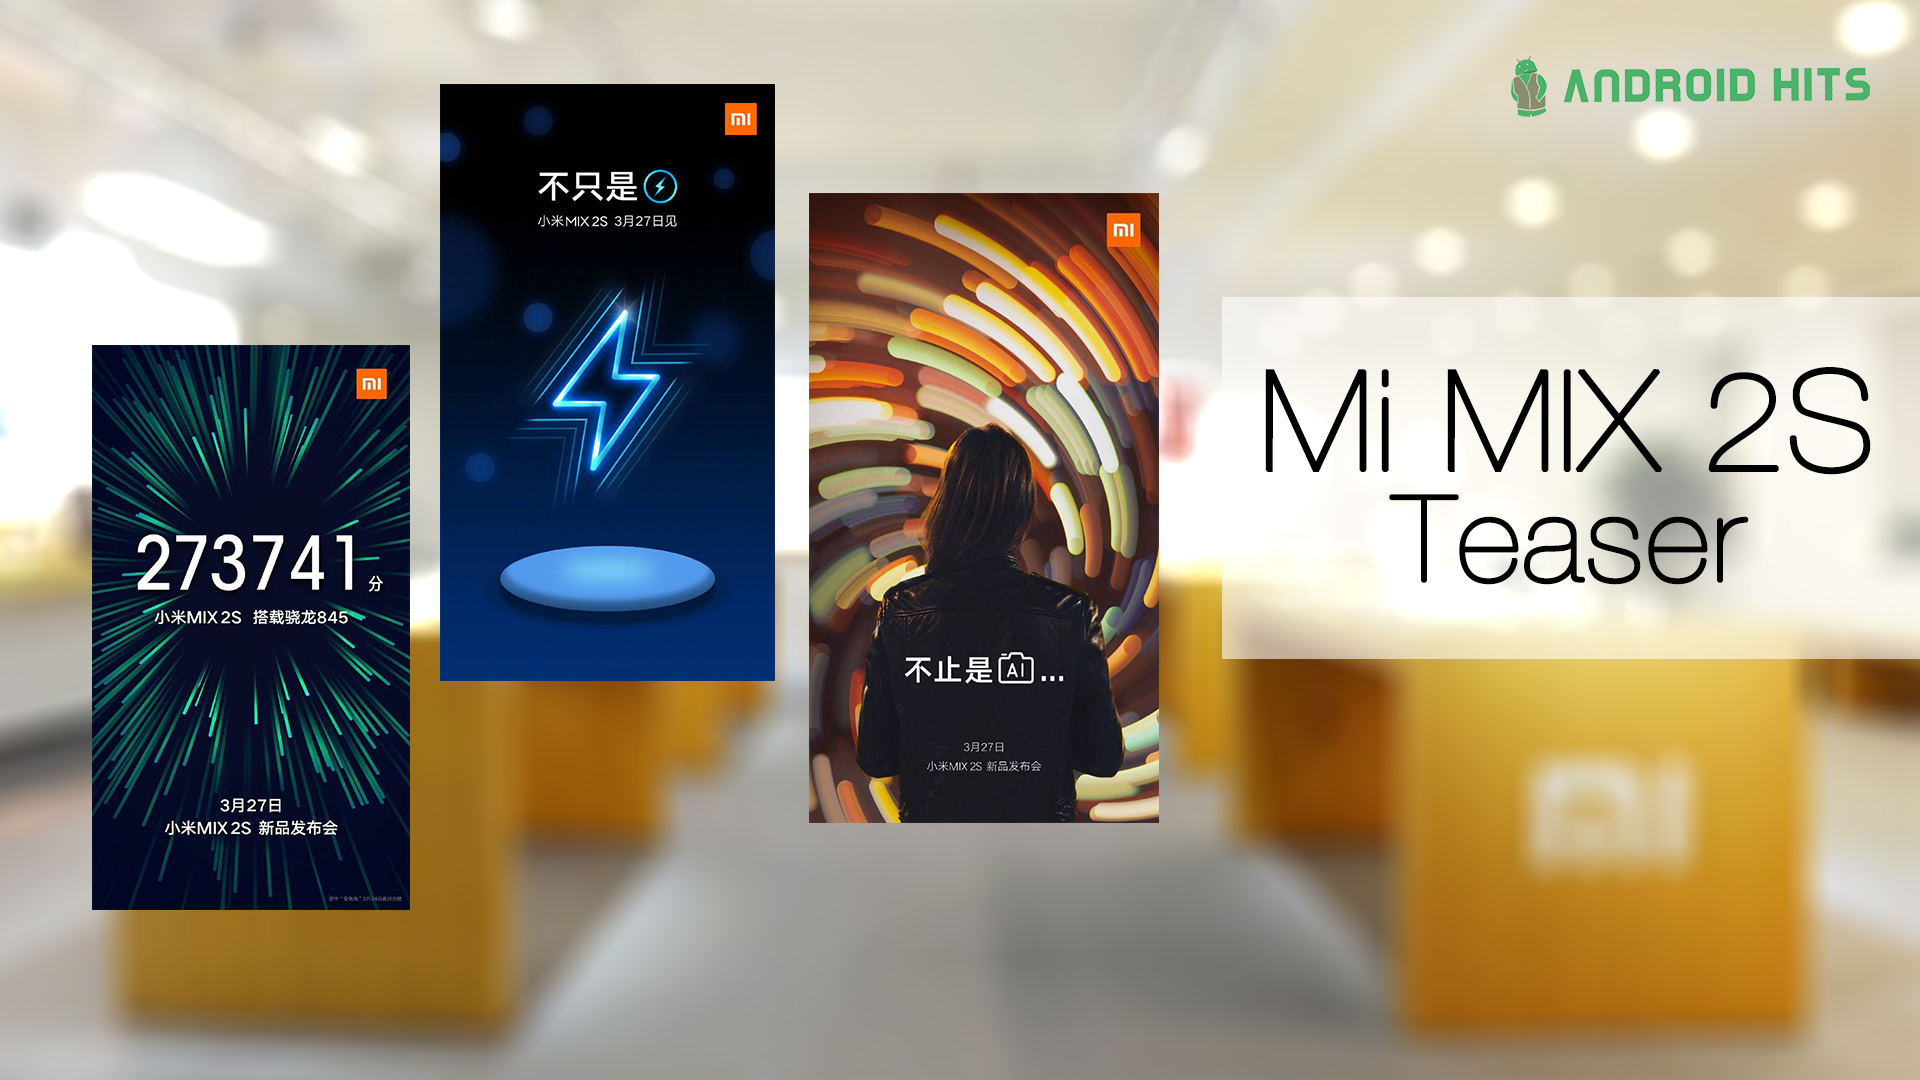 Xiaomi teases Mi MIX 2S with wireless charging, AI-dual camera and Snapdragon 845 7